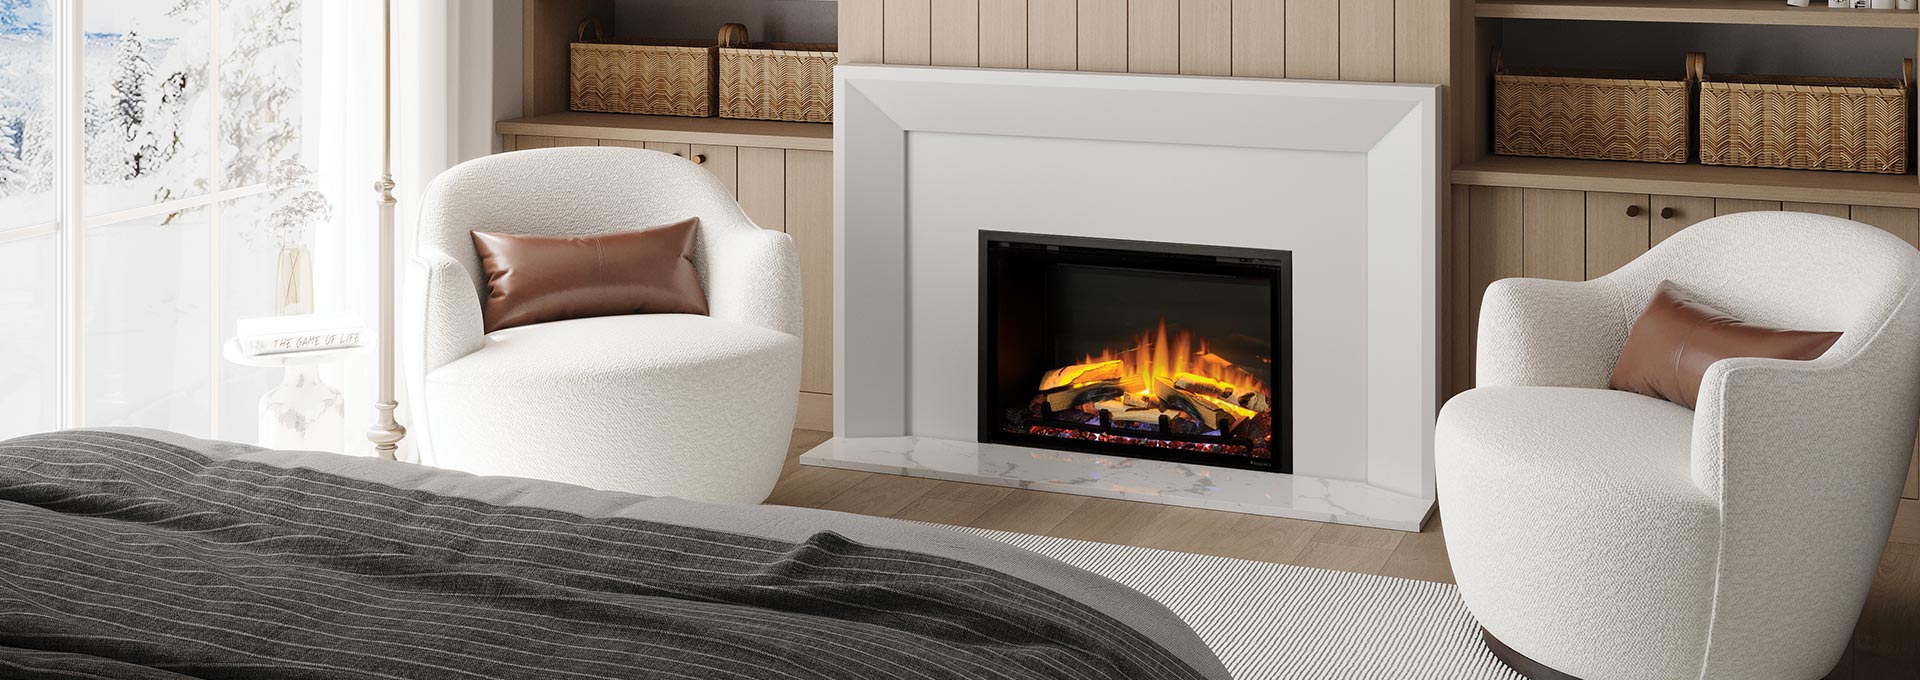 new electric fireplaces & electric inserts from regency